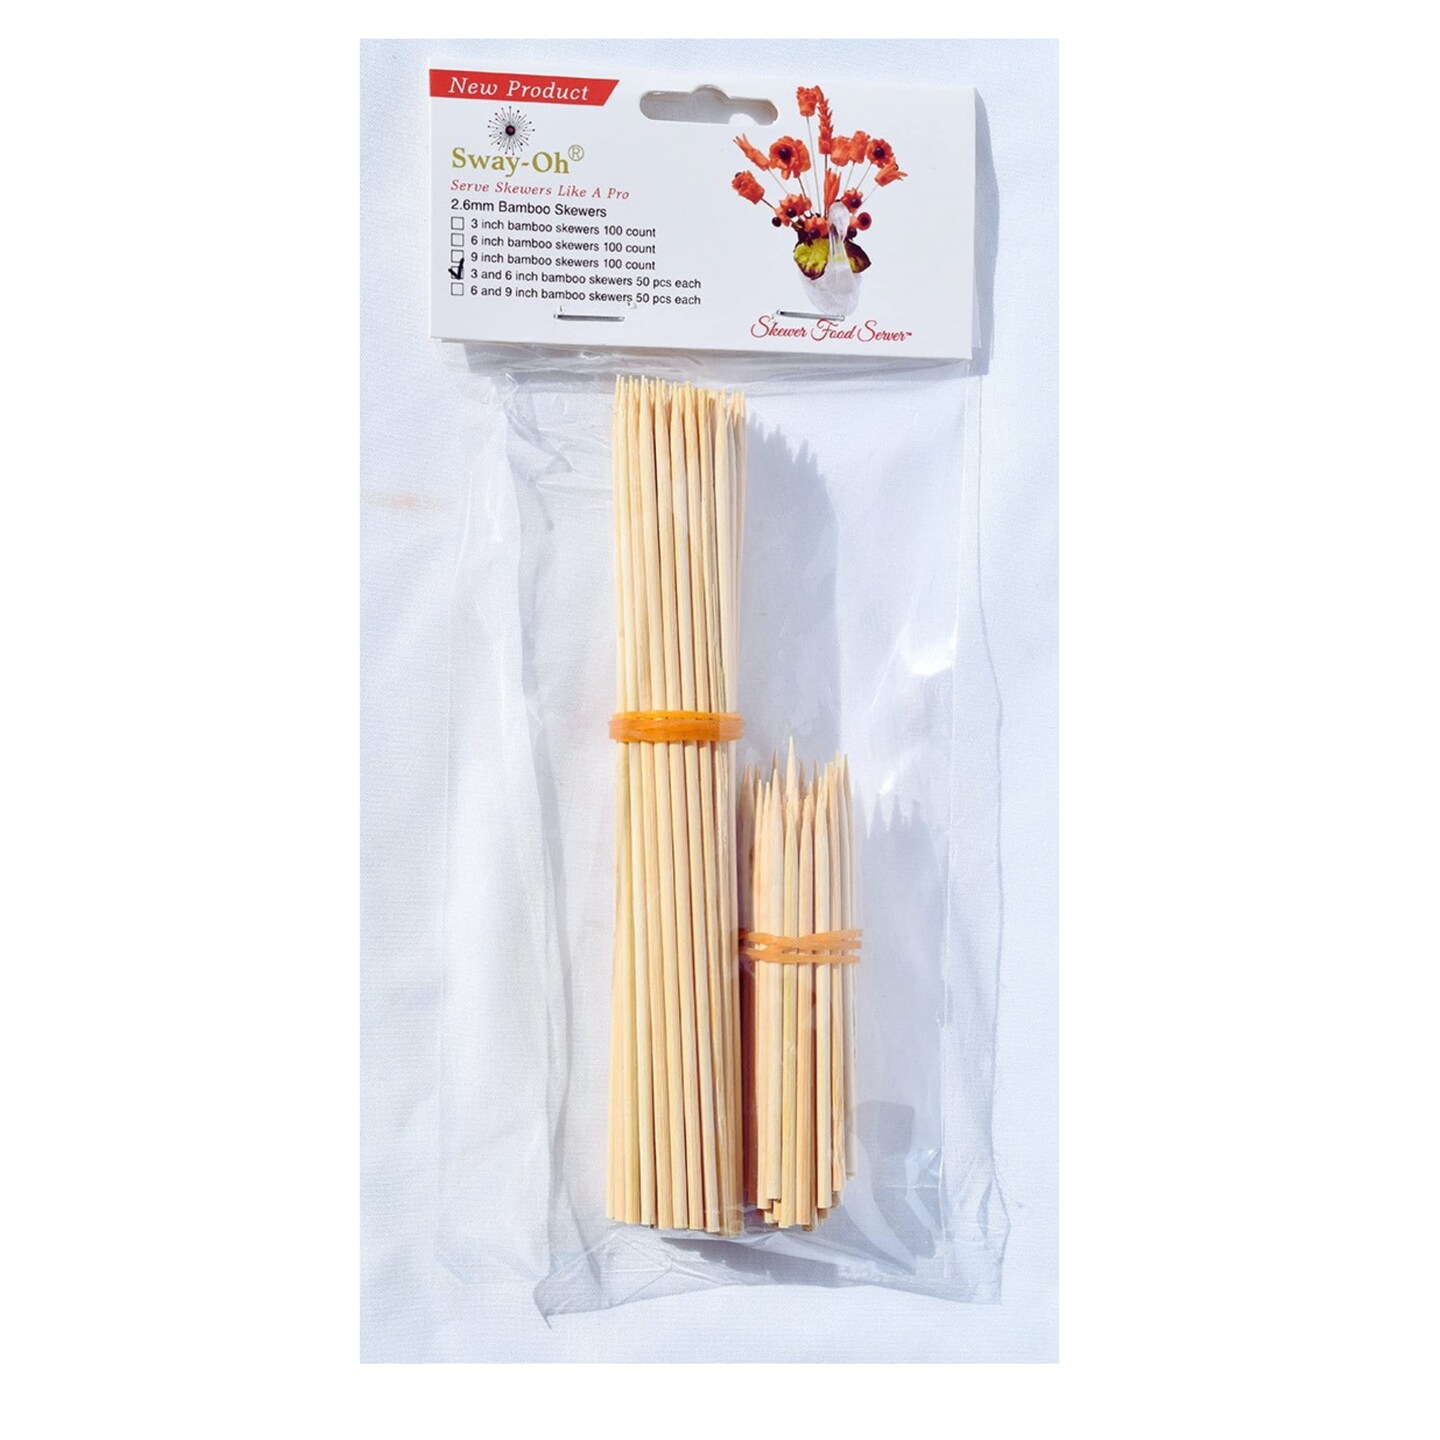 3&#x22; and 6&#x22; Natural Bamboo Skewers, 100 Count - &#xD8;=2.6mm. Natural Bamboo. Strong, durable, bamboo skewers to display bite-sized fruits, vegetables, meats, cheese, desserts, and other appetizers.